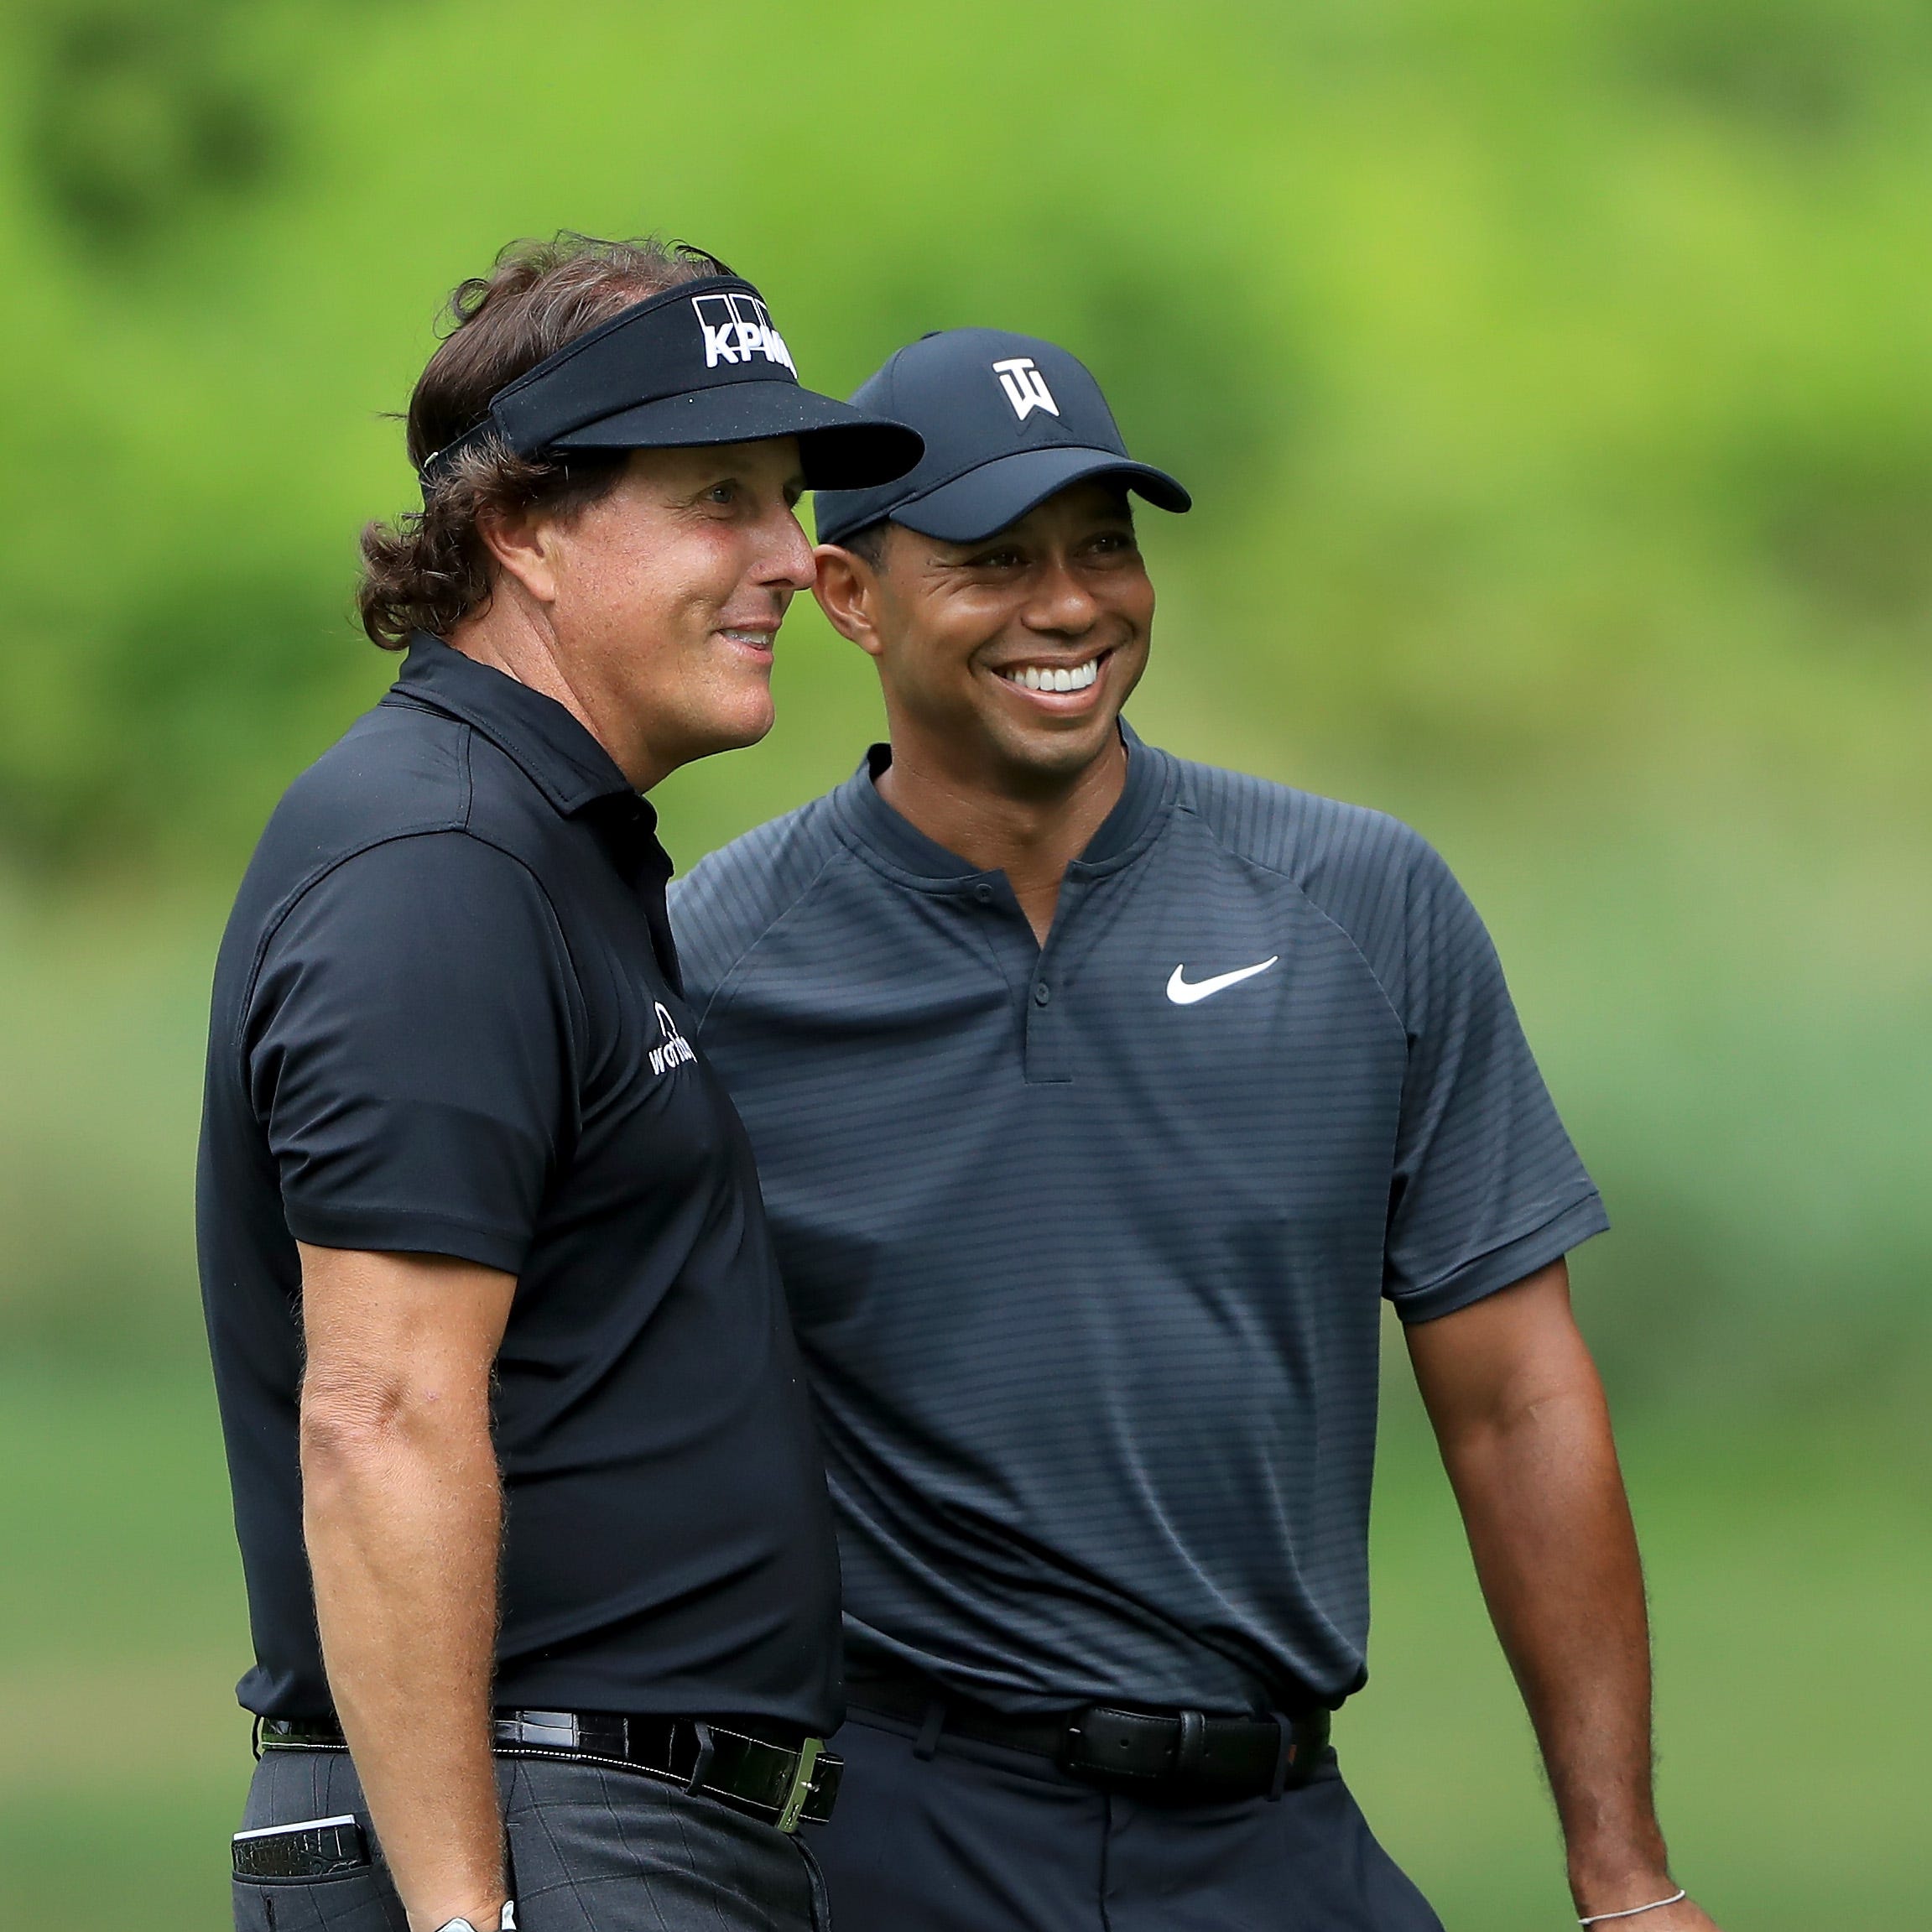 Phil Mickelson and Tiger Woods are playing a winner-take-all, pay-per-view exhibition in Las Vegas over Thanksgiving weekend, for $9 million.